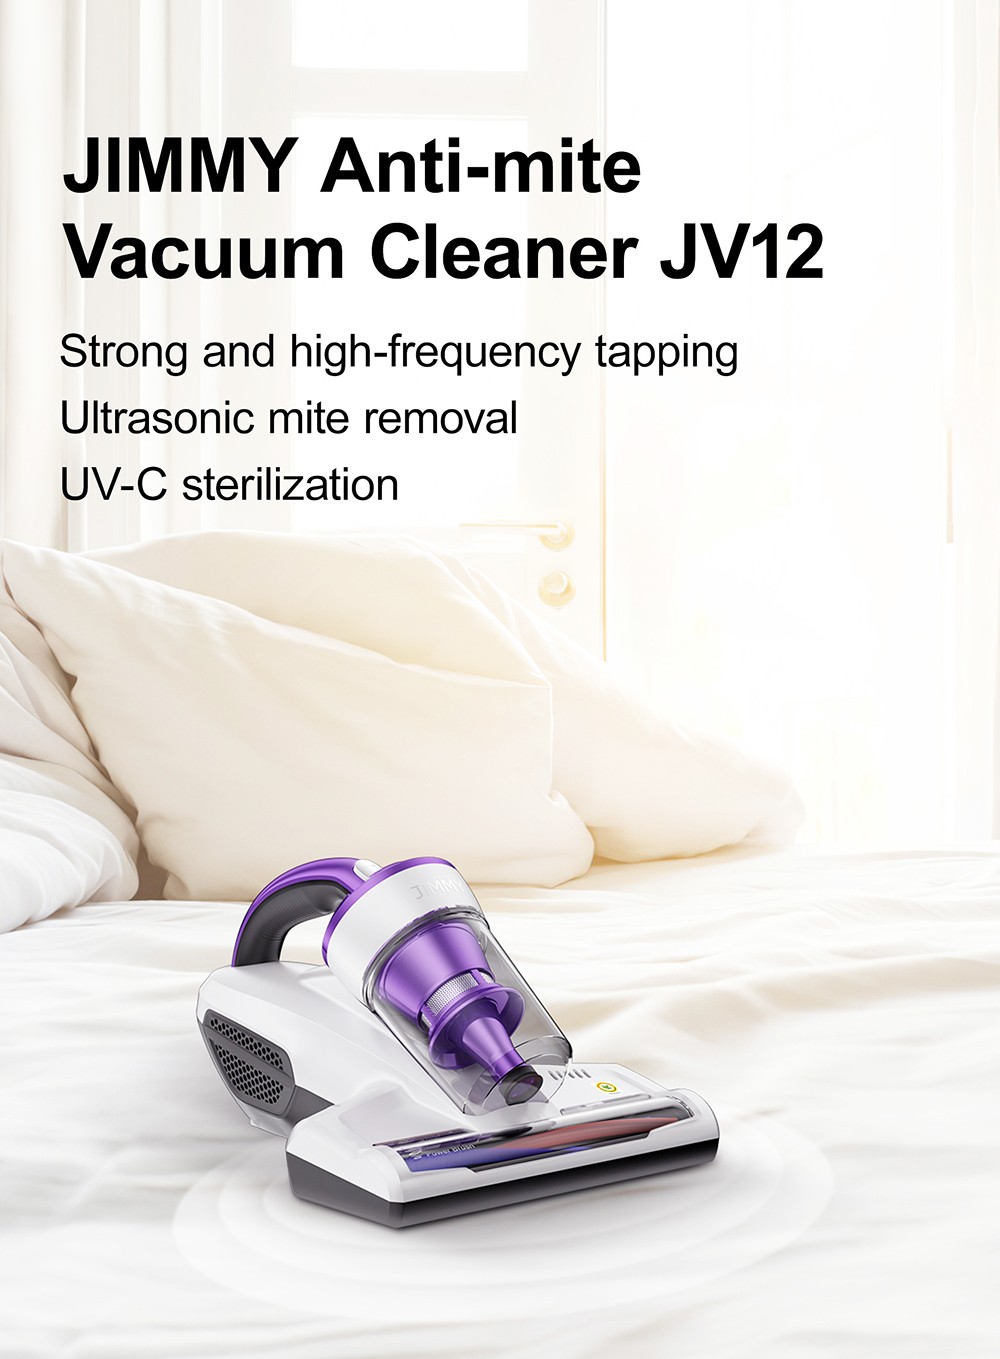 JIMMY JV12 Anti-mite Vacuum Cleaner 400W Strong Power Ultrasound UV-C Sterilization 220mm Widened Suction Port with Patented Composite Brush Roll Dual Cyclone &; MIF Filter 0.4L prachová nádoba - biela